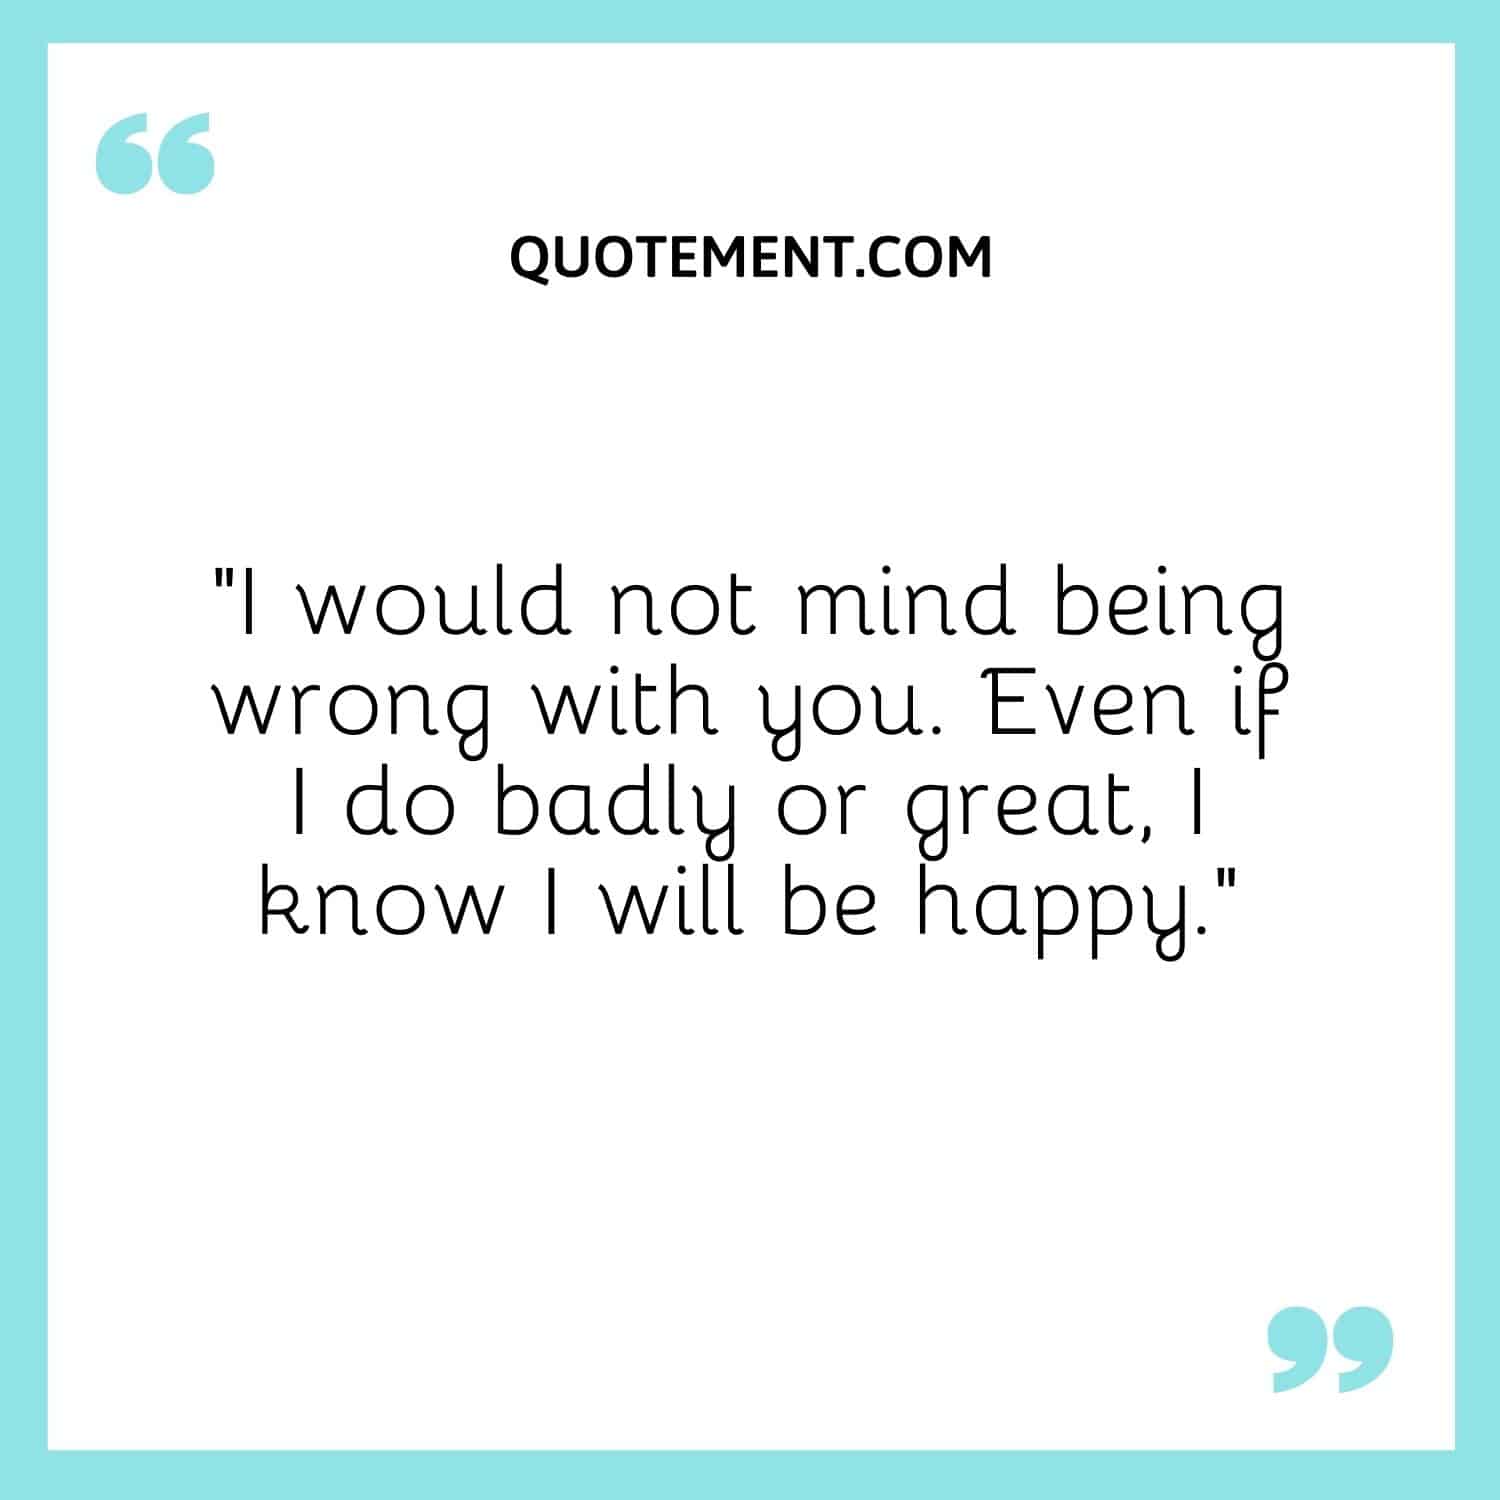 I would not mind being wrong with you